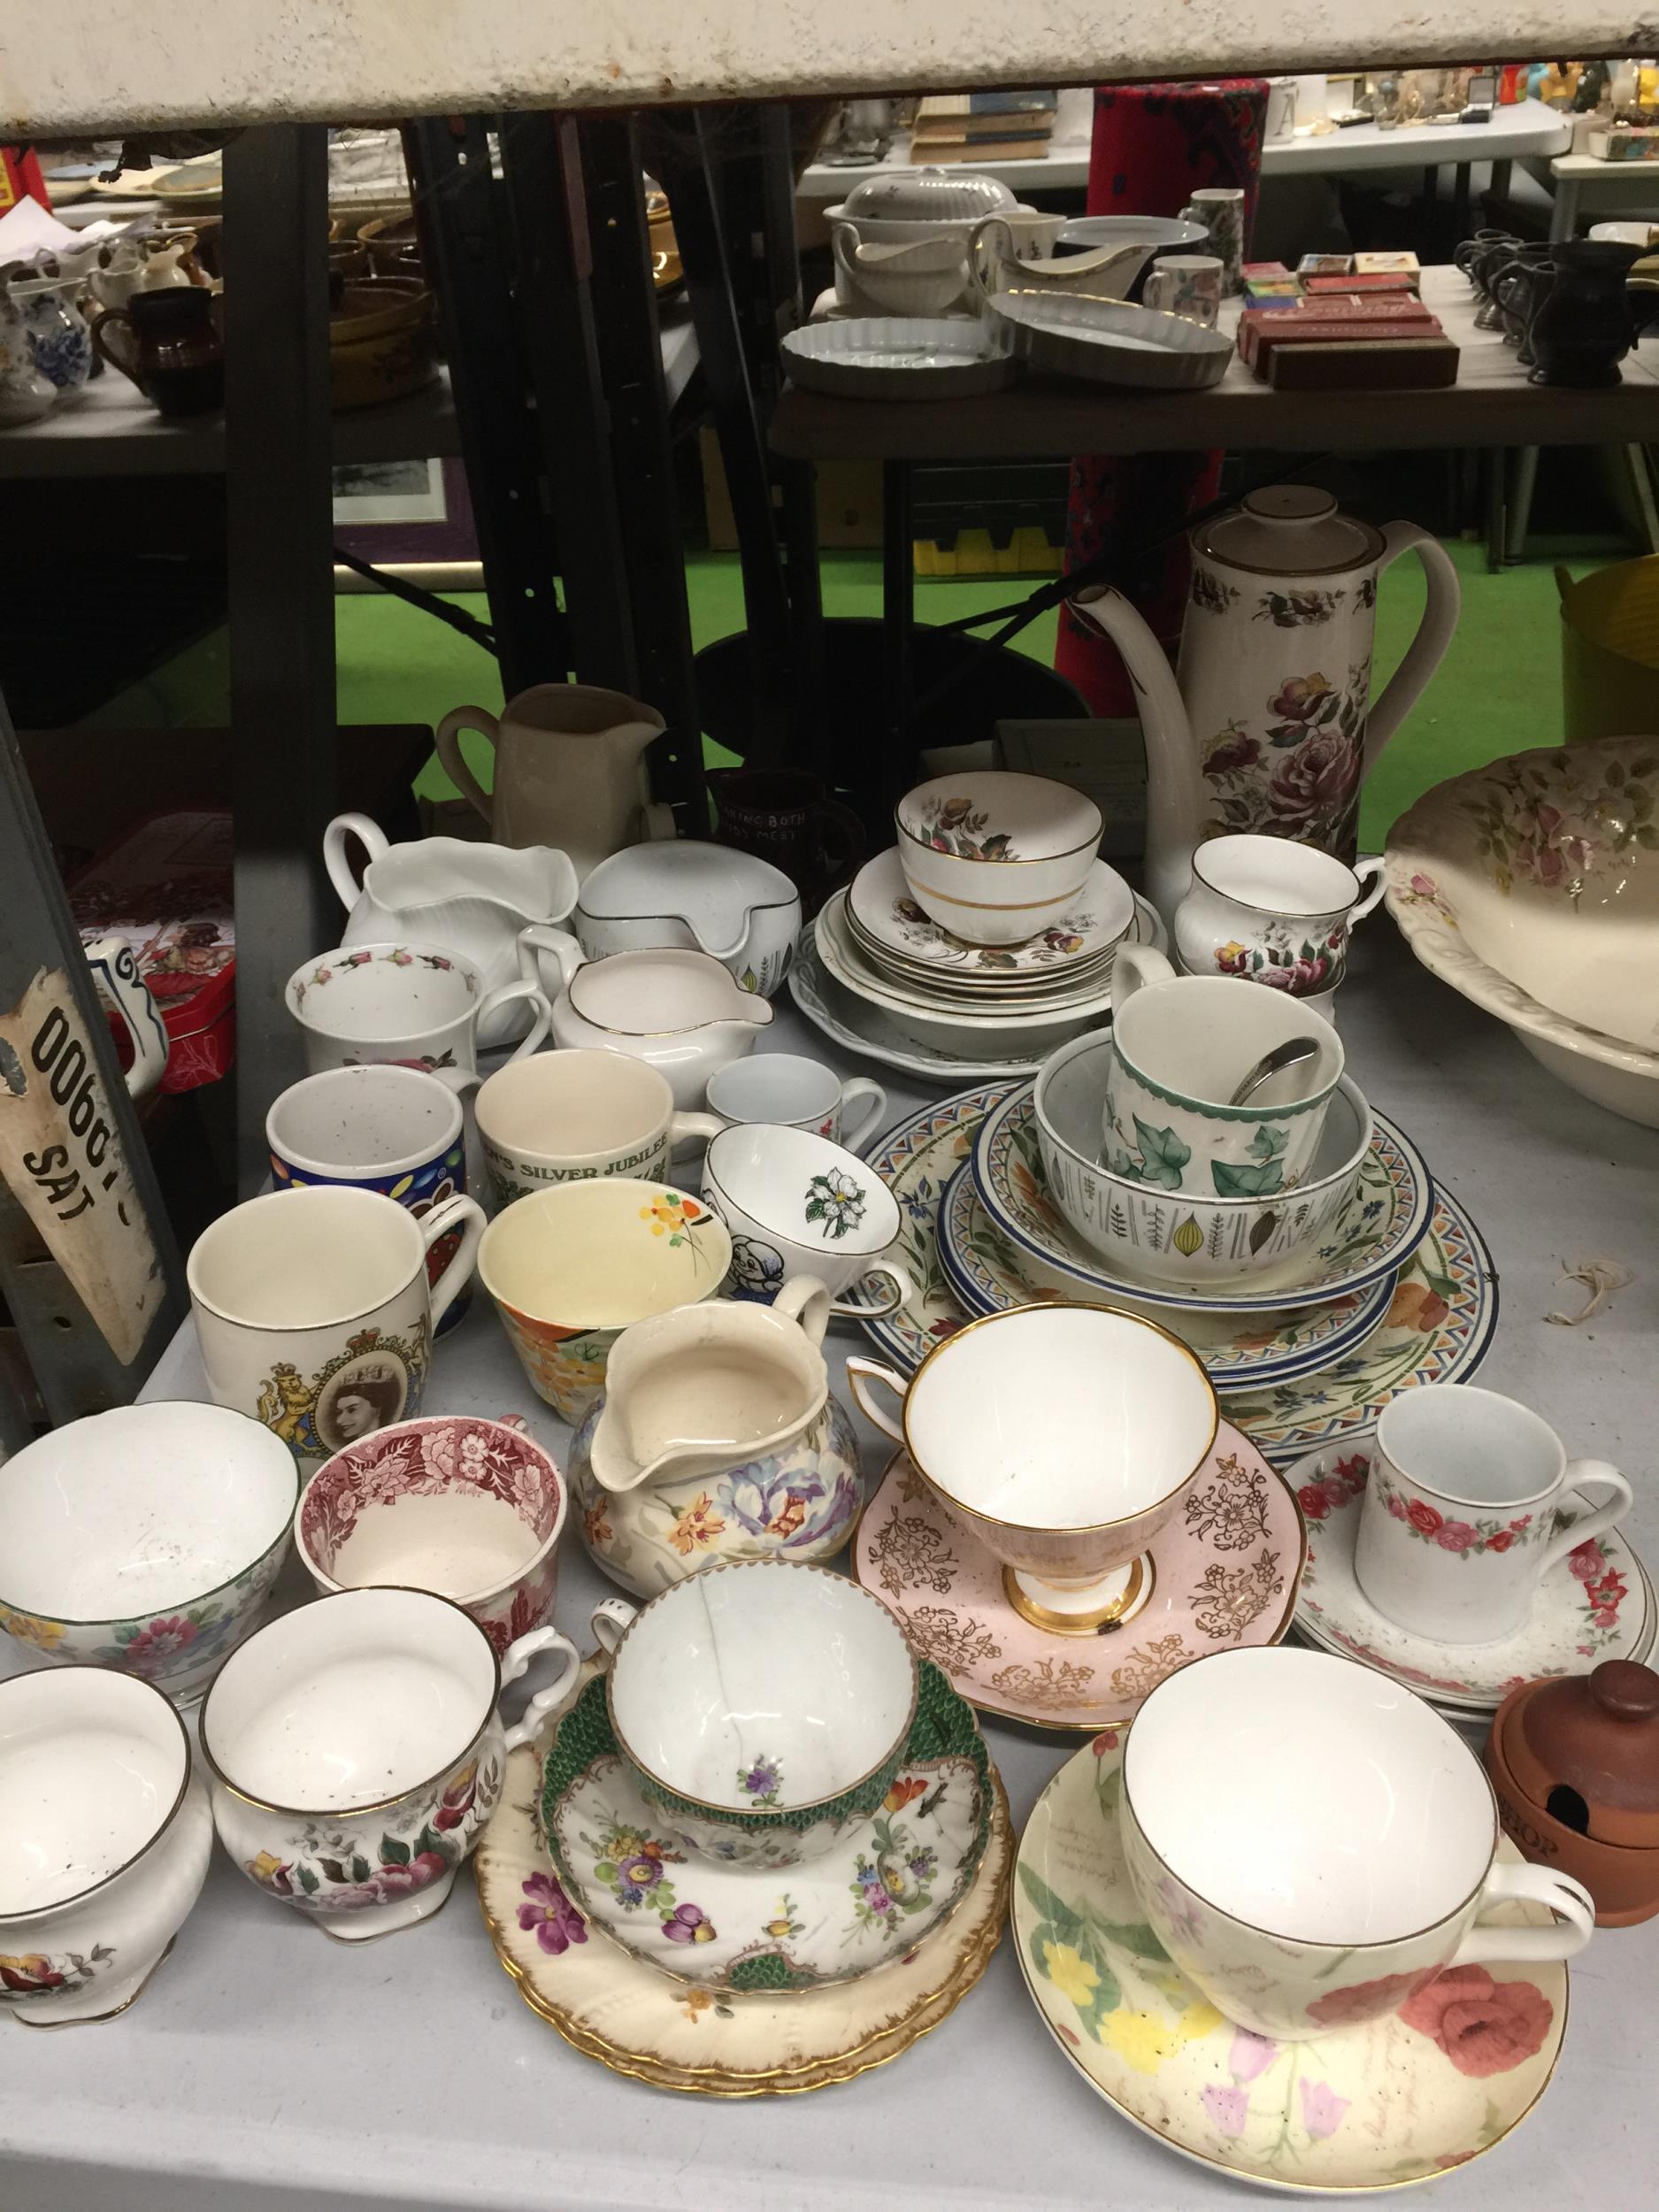 A LARGE QUANTITY OF CERAMICS TO INCLUDE CUPS, SAUCERS, MILK JUGS, COFFEEPOT, SUGAR BOWLS ETC.,